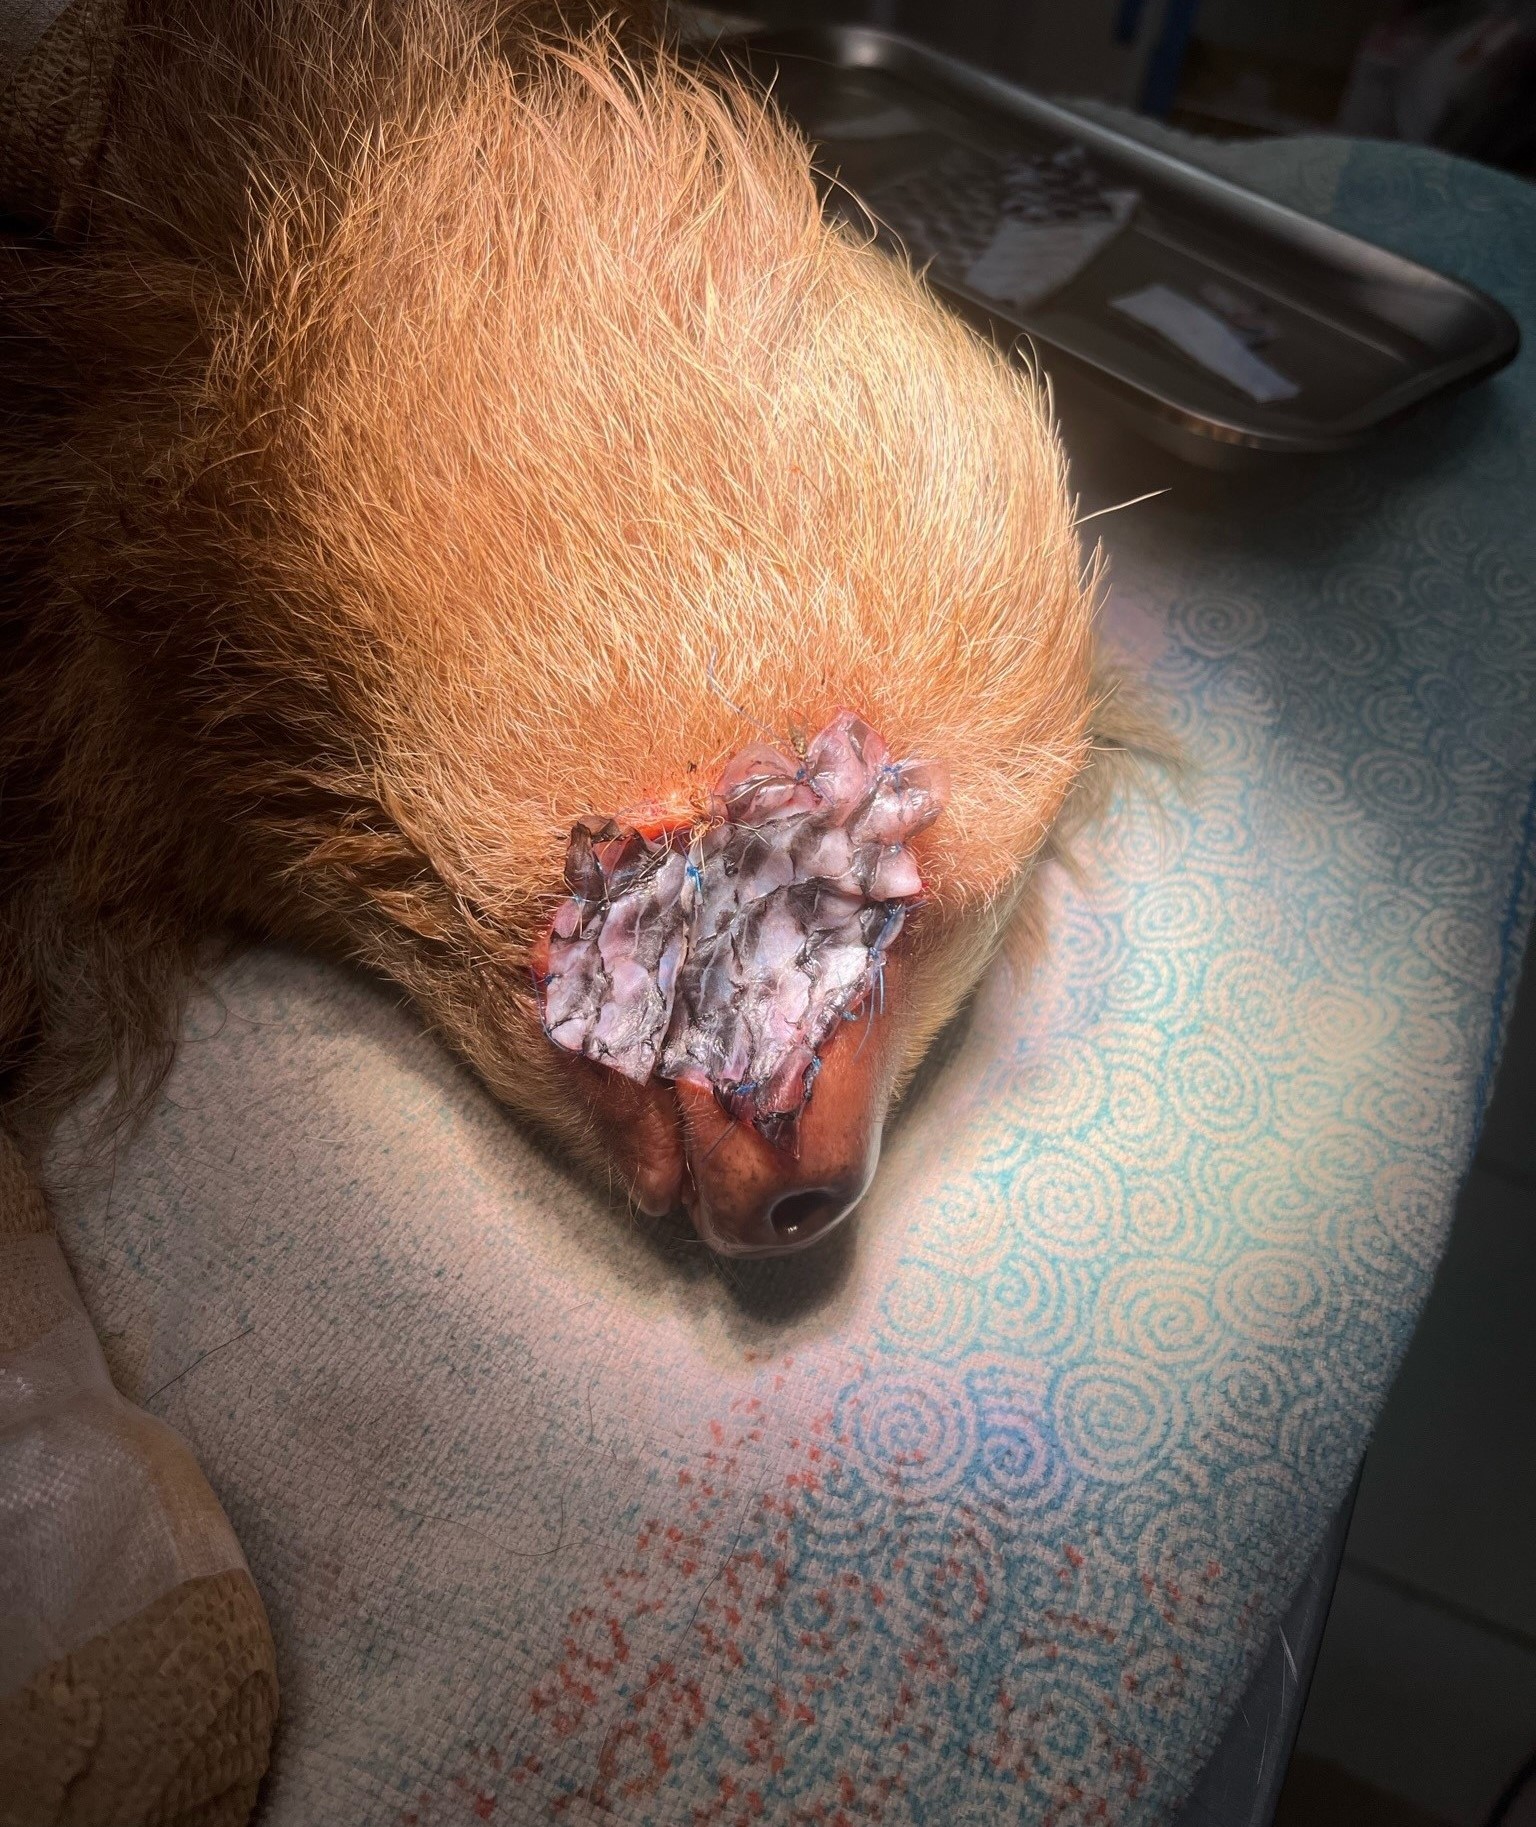 Costa Rica sloth undergoing treatment with Tilapia skin.